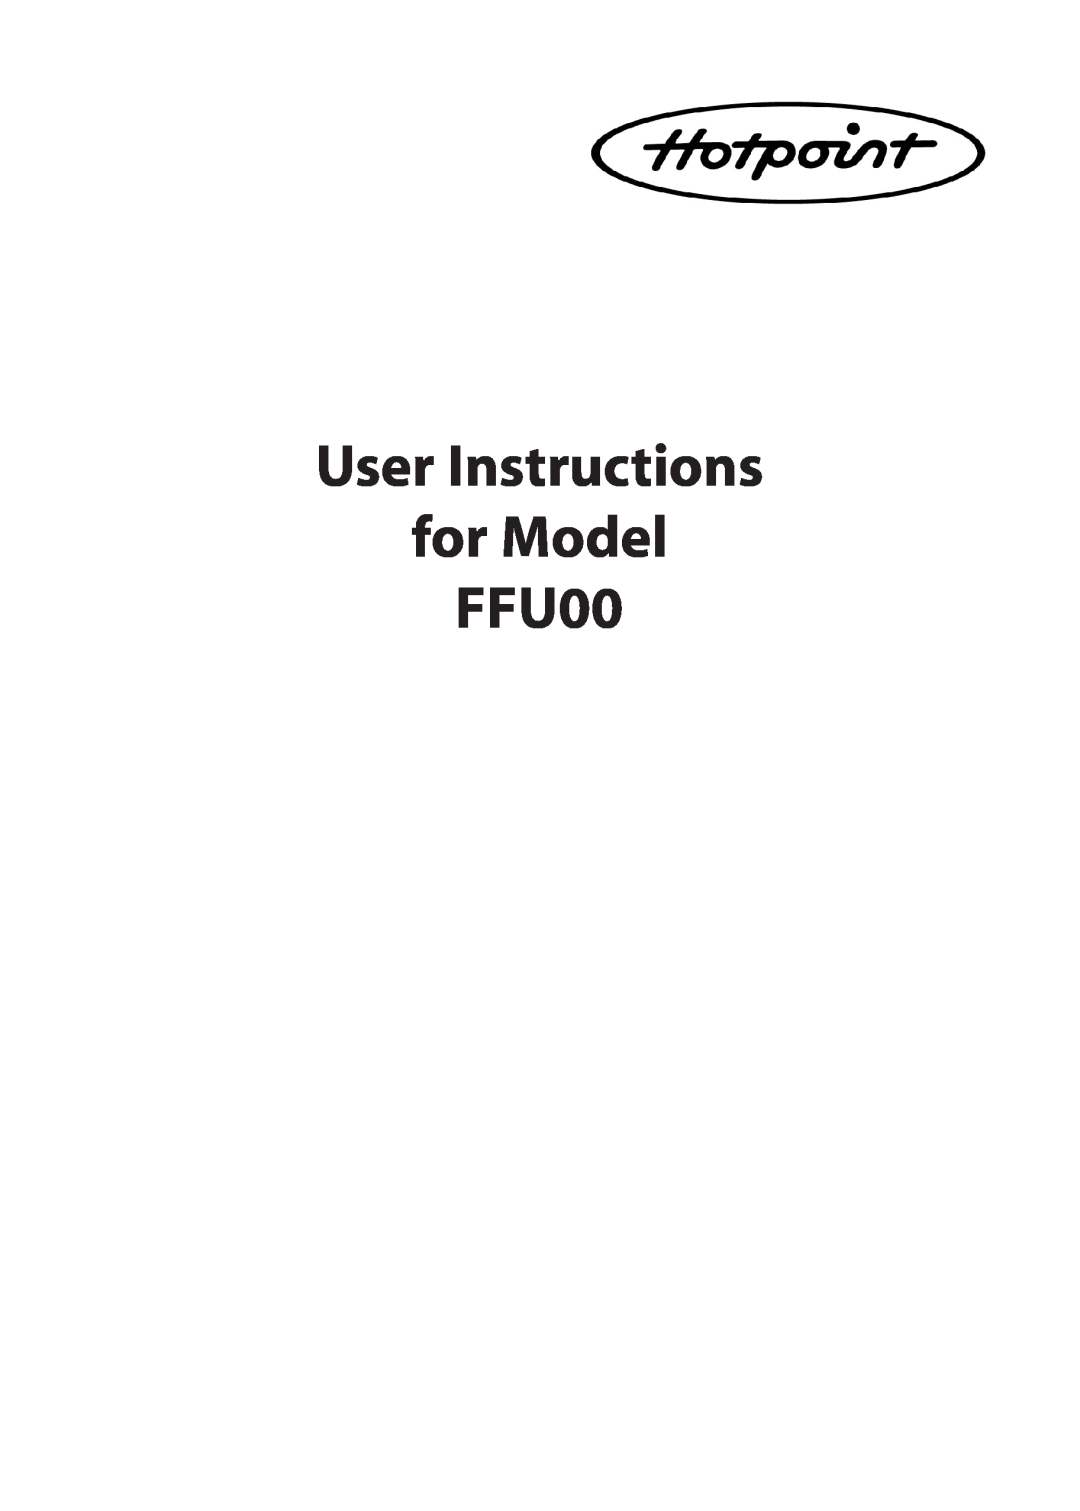 Hotpoint manual User Instructions for Model FFU00 